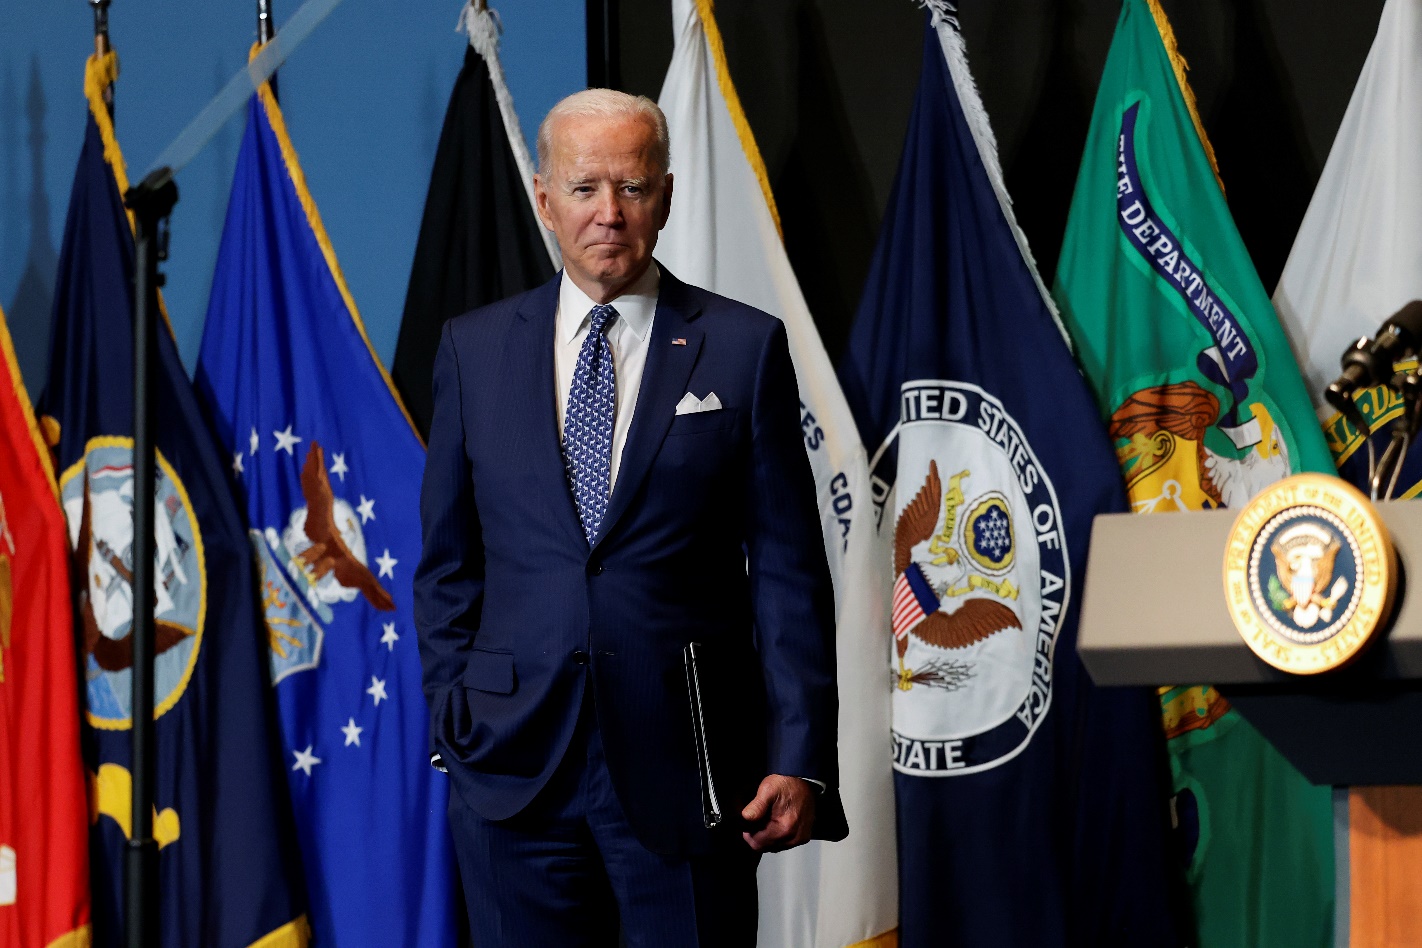  U.S. President Joe Biden departs after delivering remarks to members of "the intelligence community workforce and its leadership" during a visit to the Office of the Director of National Intelligence in nearby McLean, Virginia outside Washington, U.S., July 27, 2021. REUTERS/Evelyn Hockstein